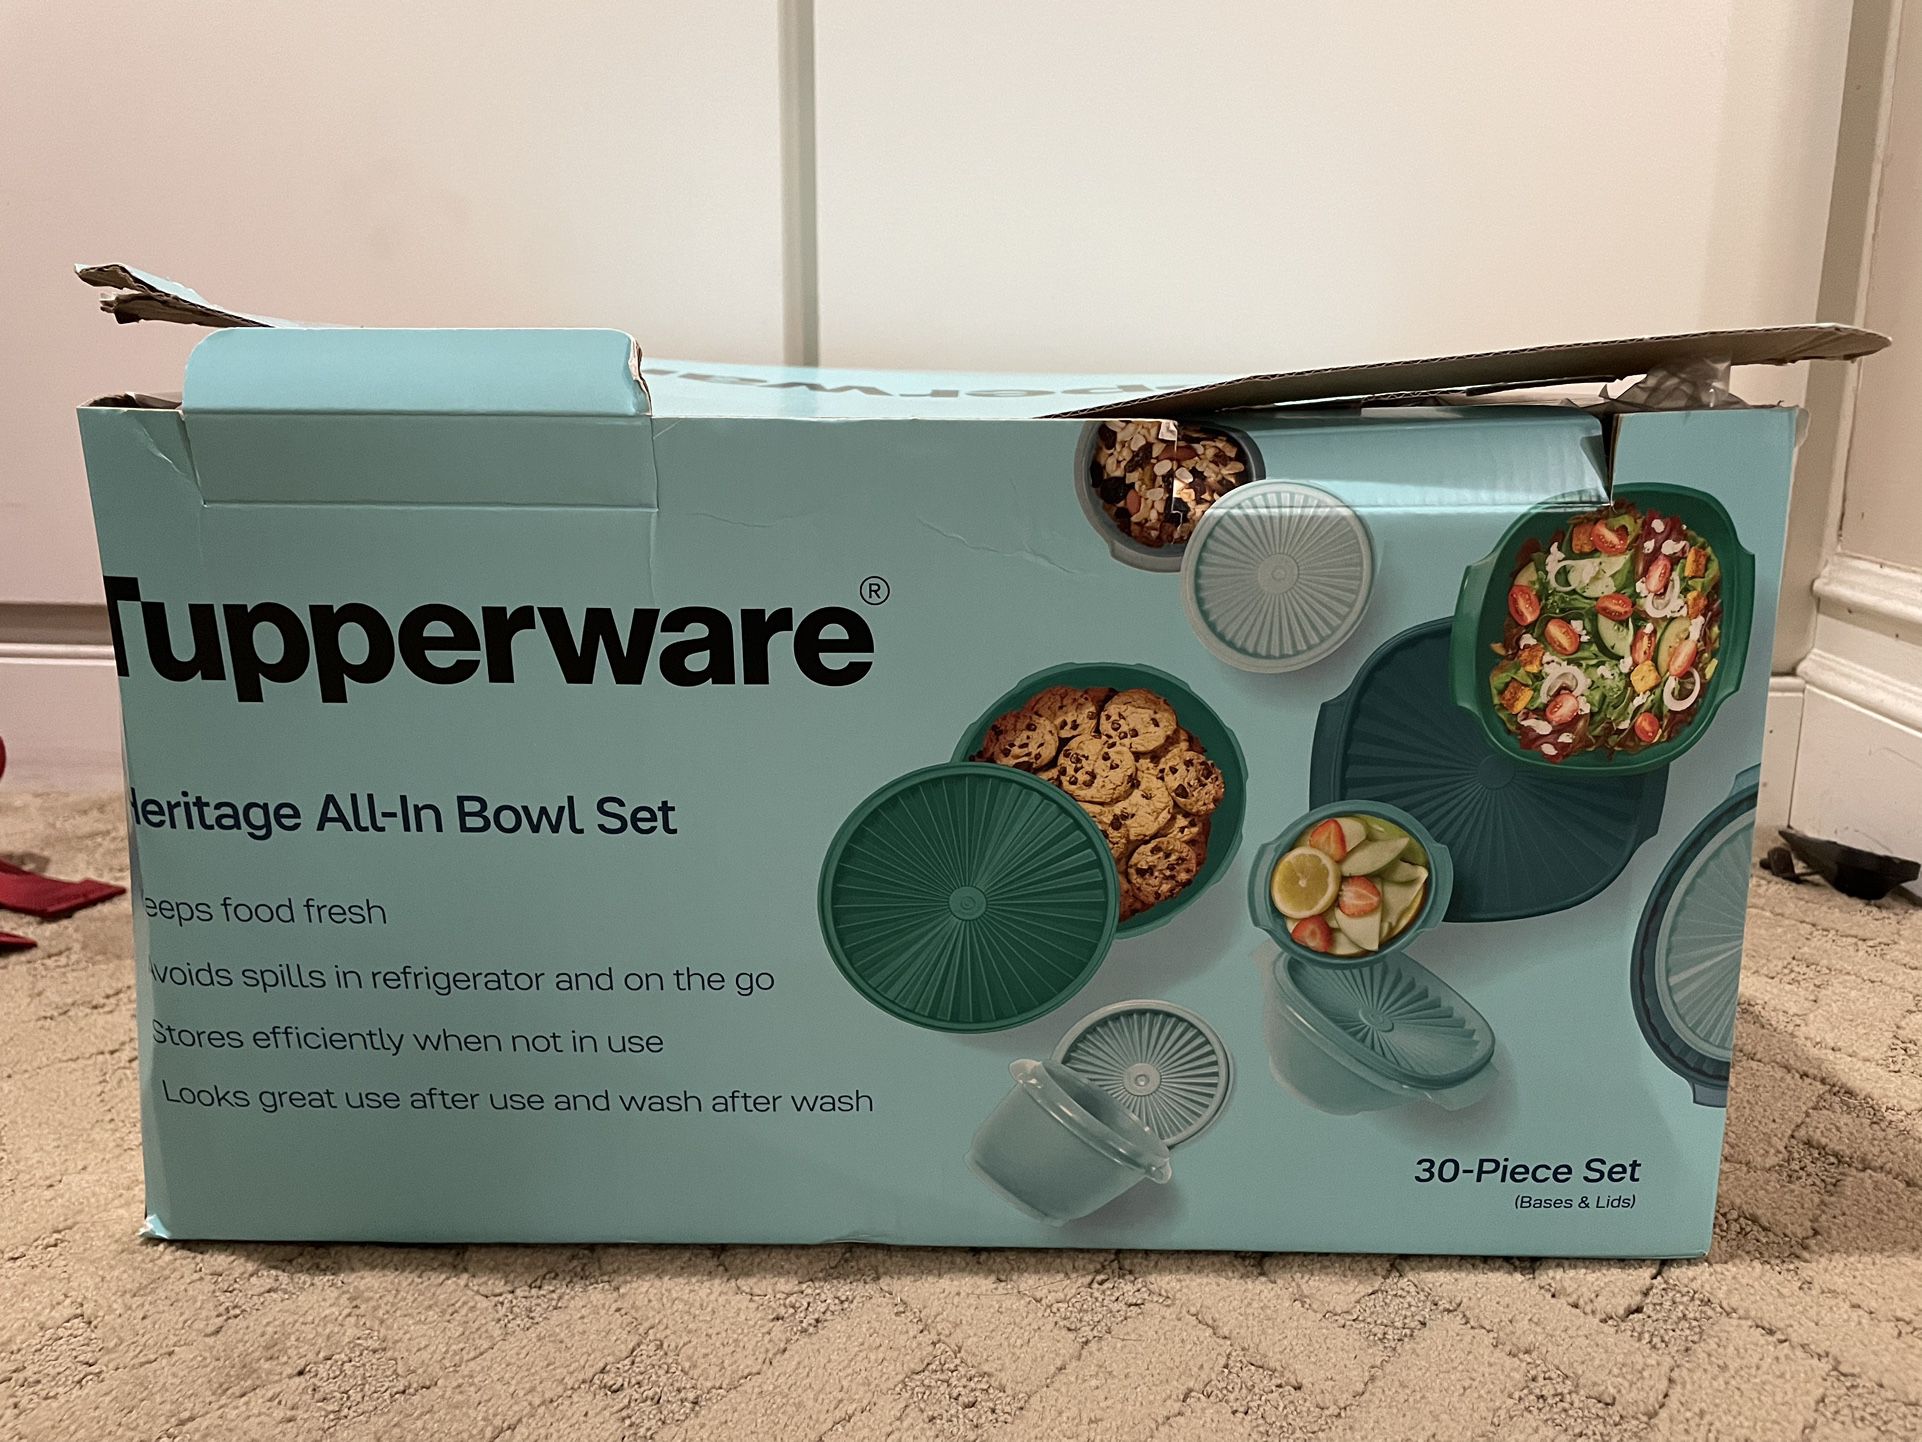 We Found Tupperware's Heritage Collection on Sale for Under $30